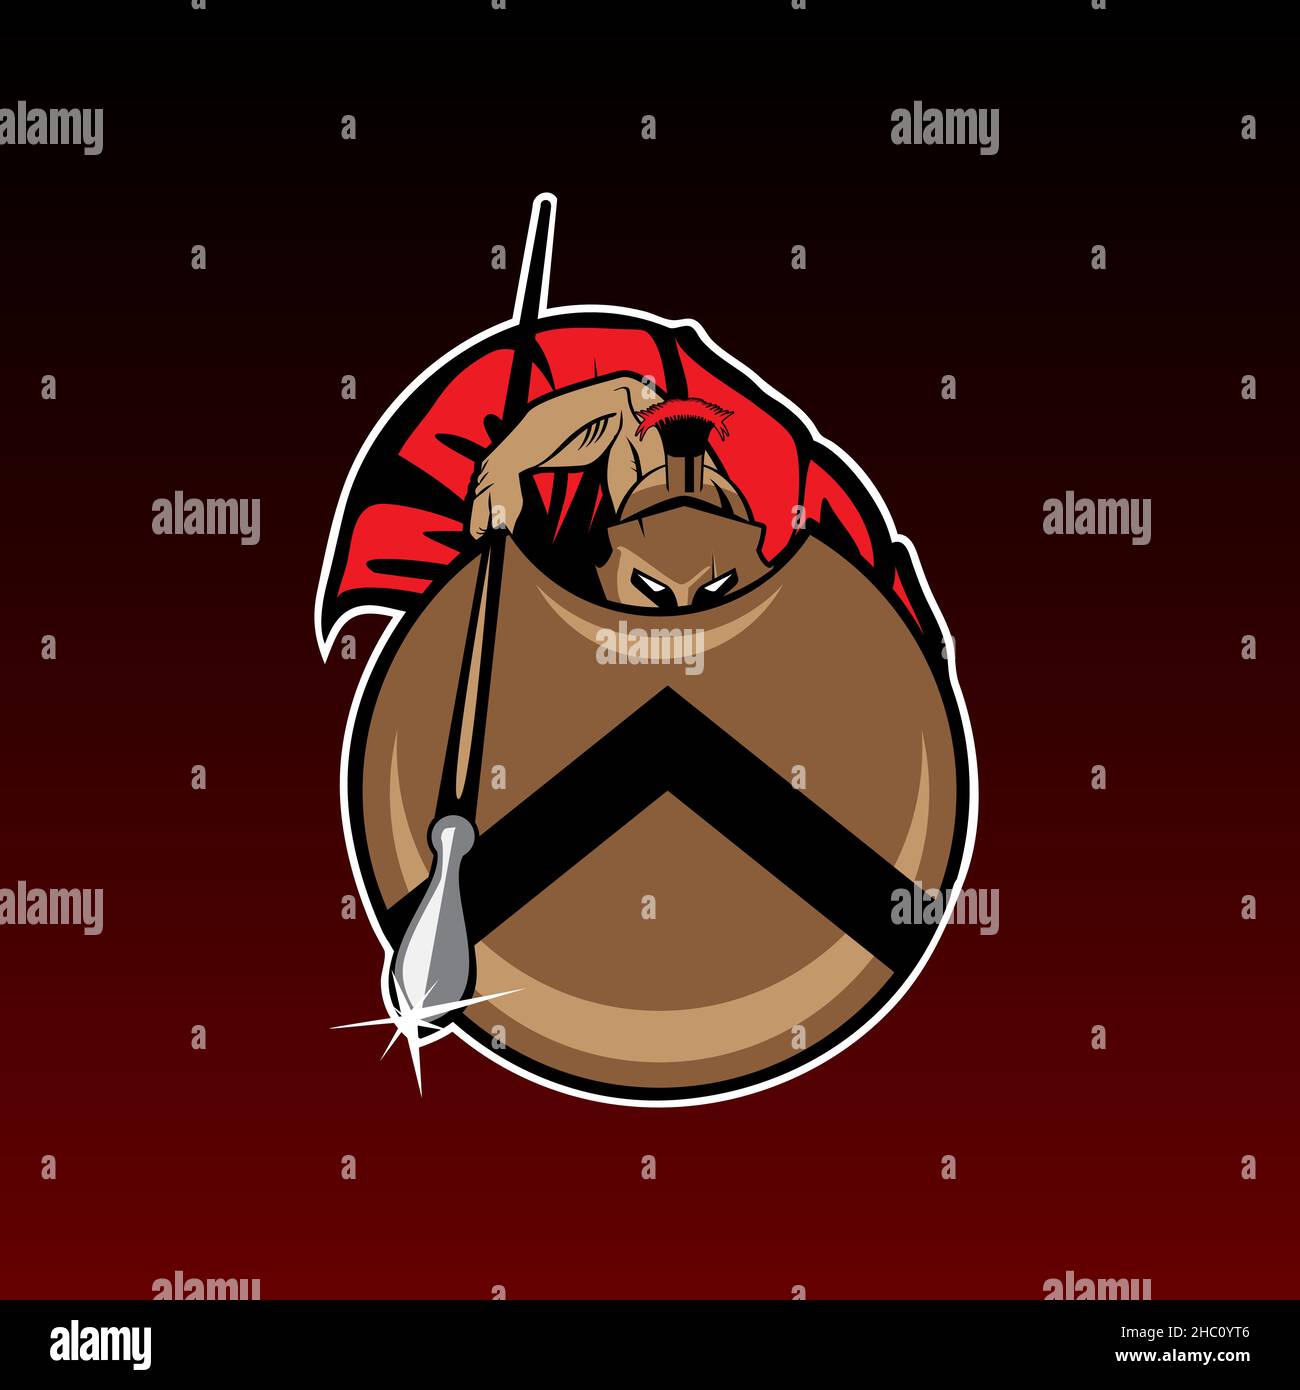 Spartan Warrior emblem in defense position from Thermopylae history. can be used for tshirt printing, logo, or any other purpose. Stock Vector